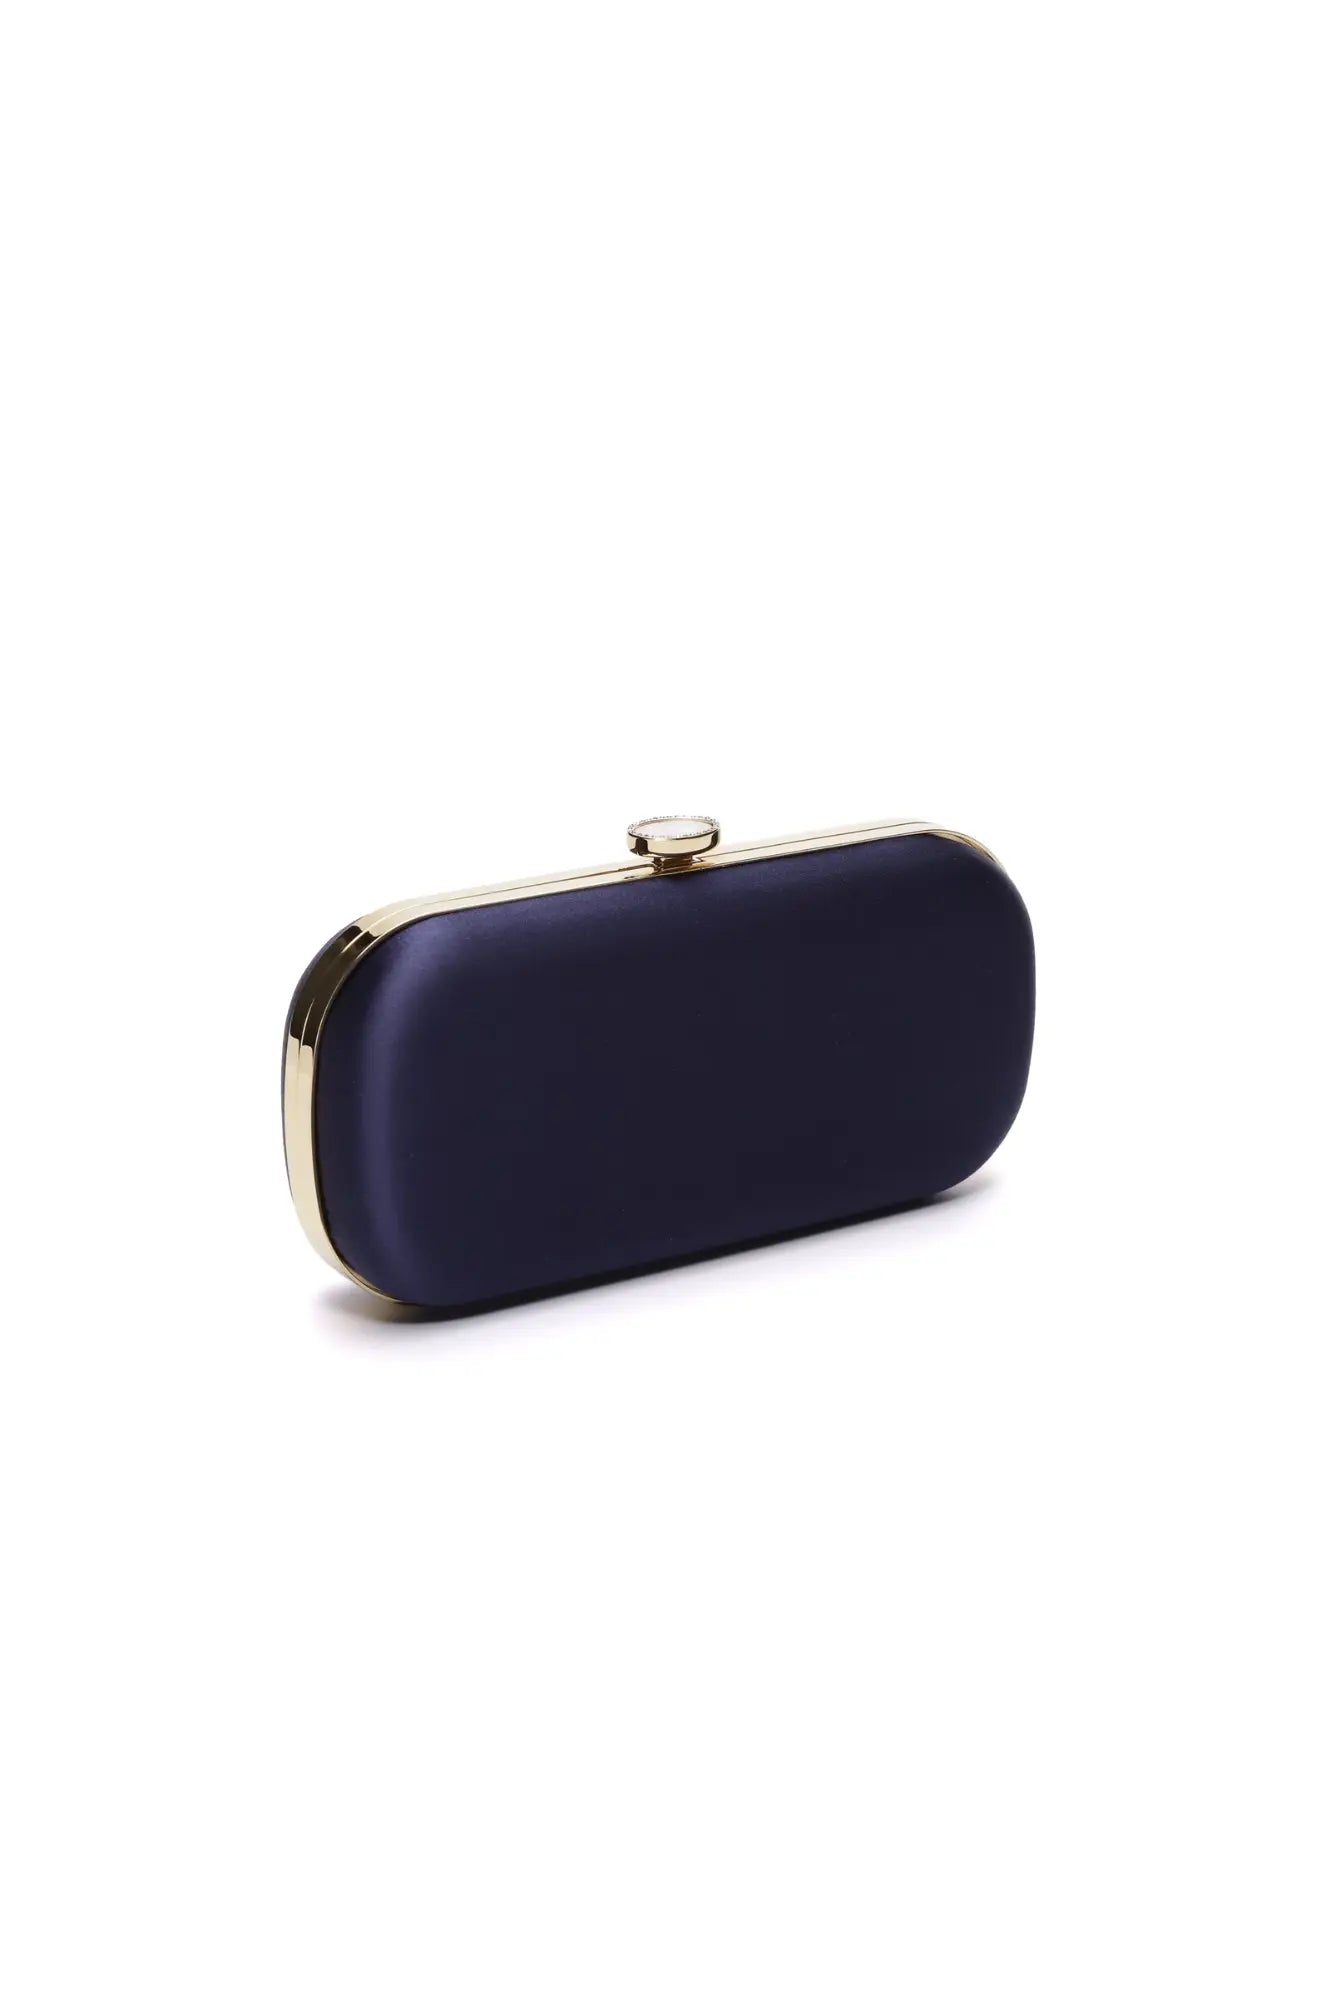 Bella Rosa Collection Navy Blue Petite evening clutch purse with gold accents on a white background.